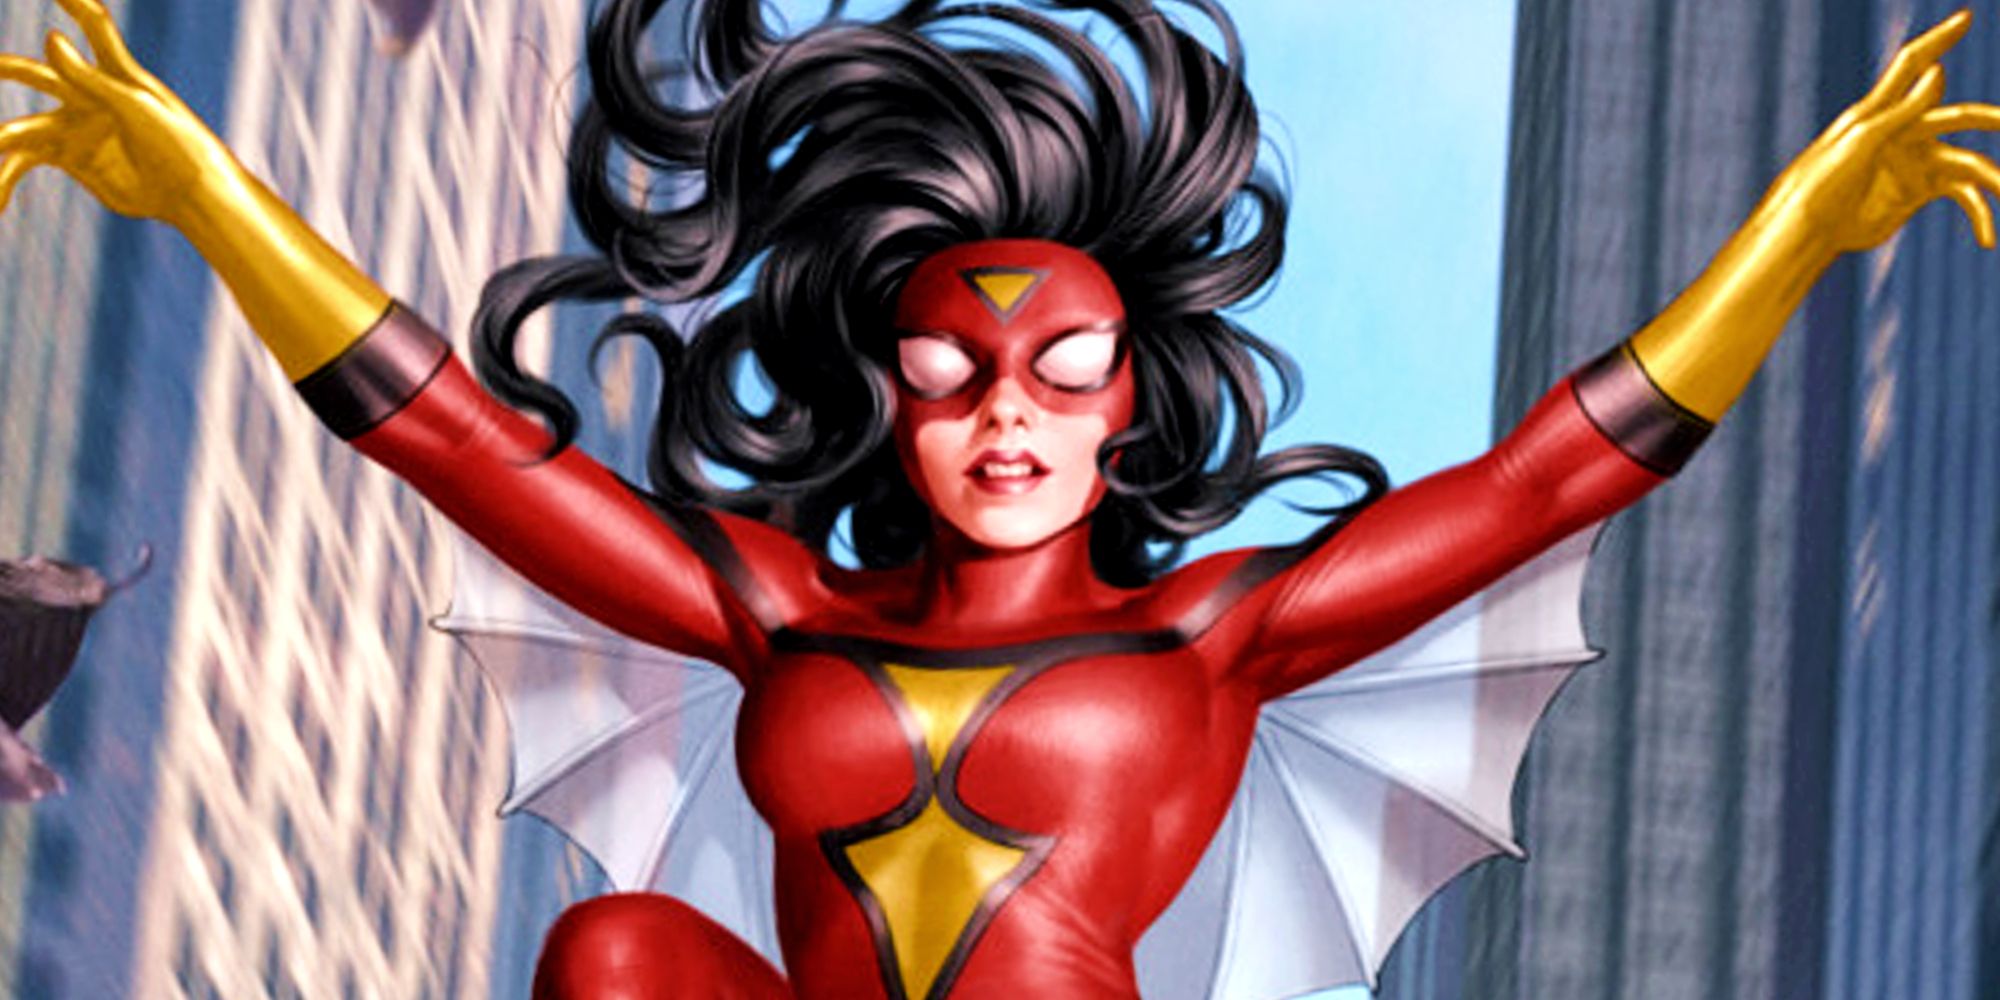 Jessica Drew as Spider-Woman, spreading her arms wide as she soars through a city.